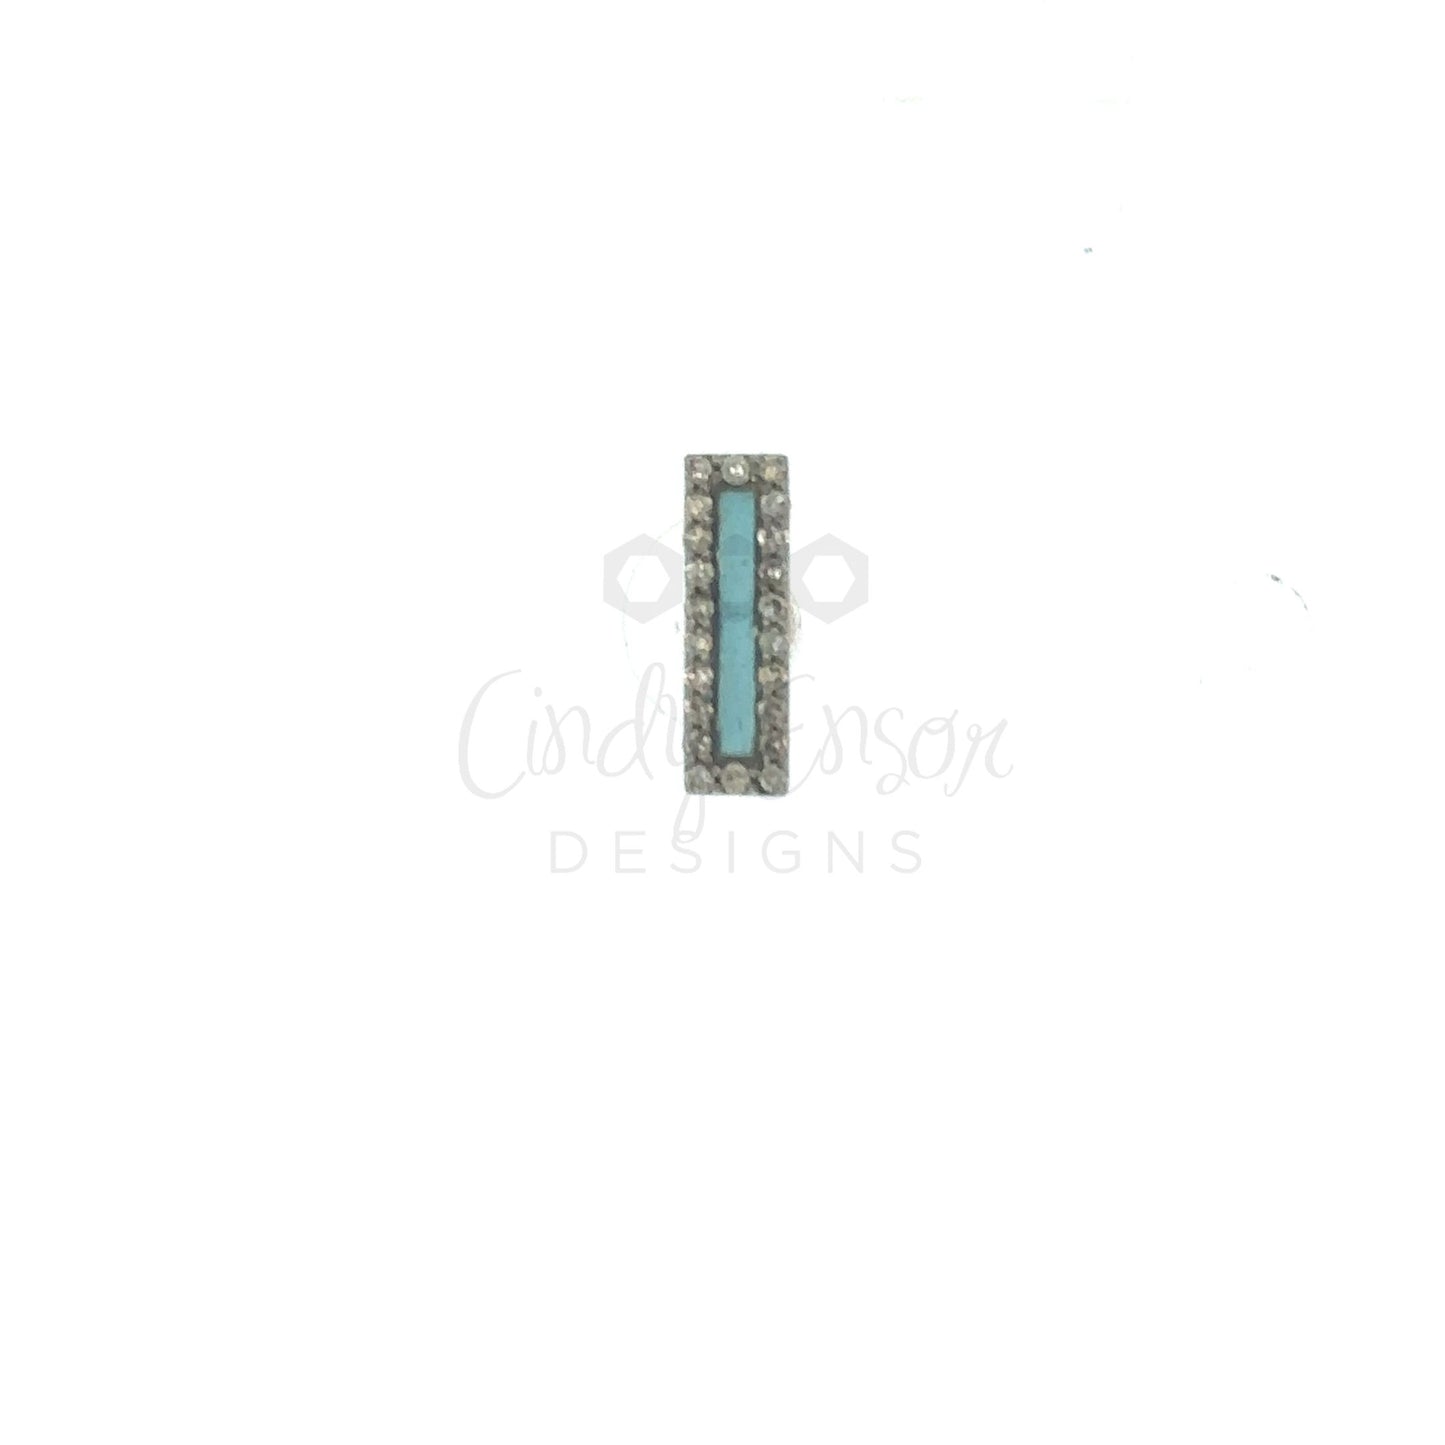 Single Sterling Silver Turquoise Enamel Bar Stud with Pave Border